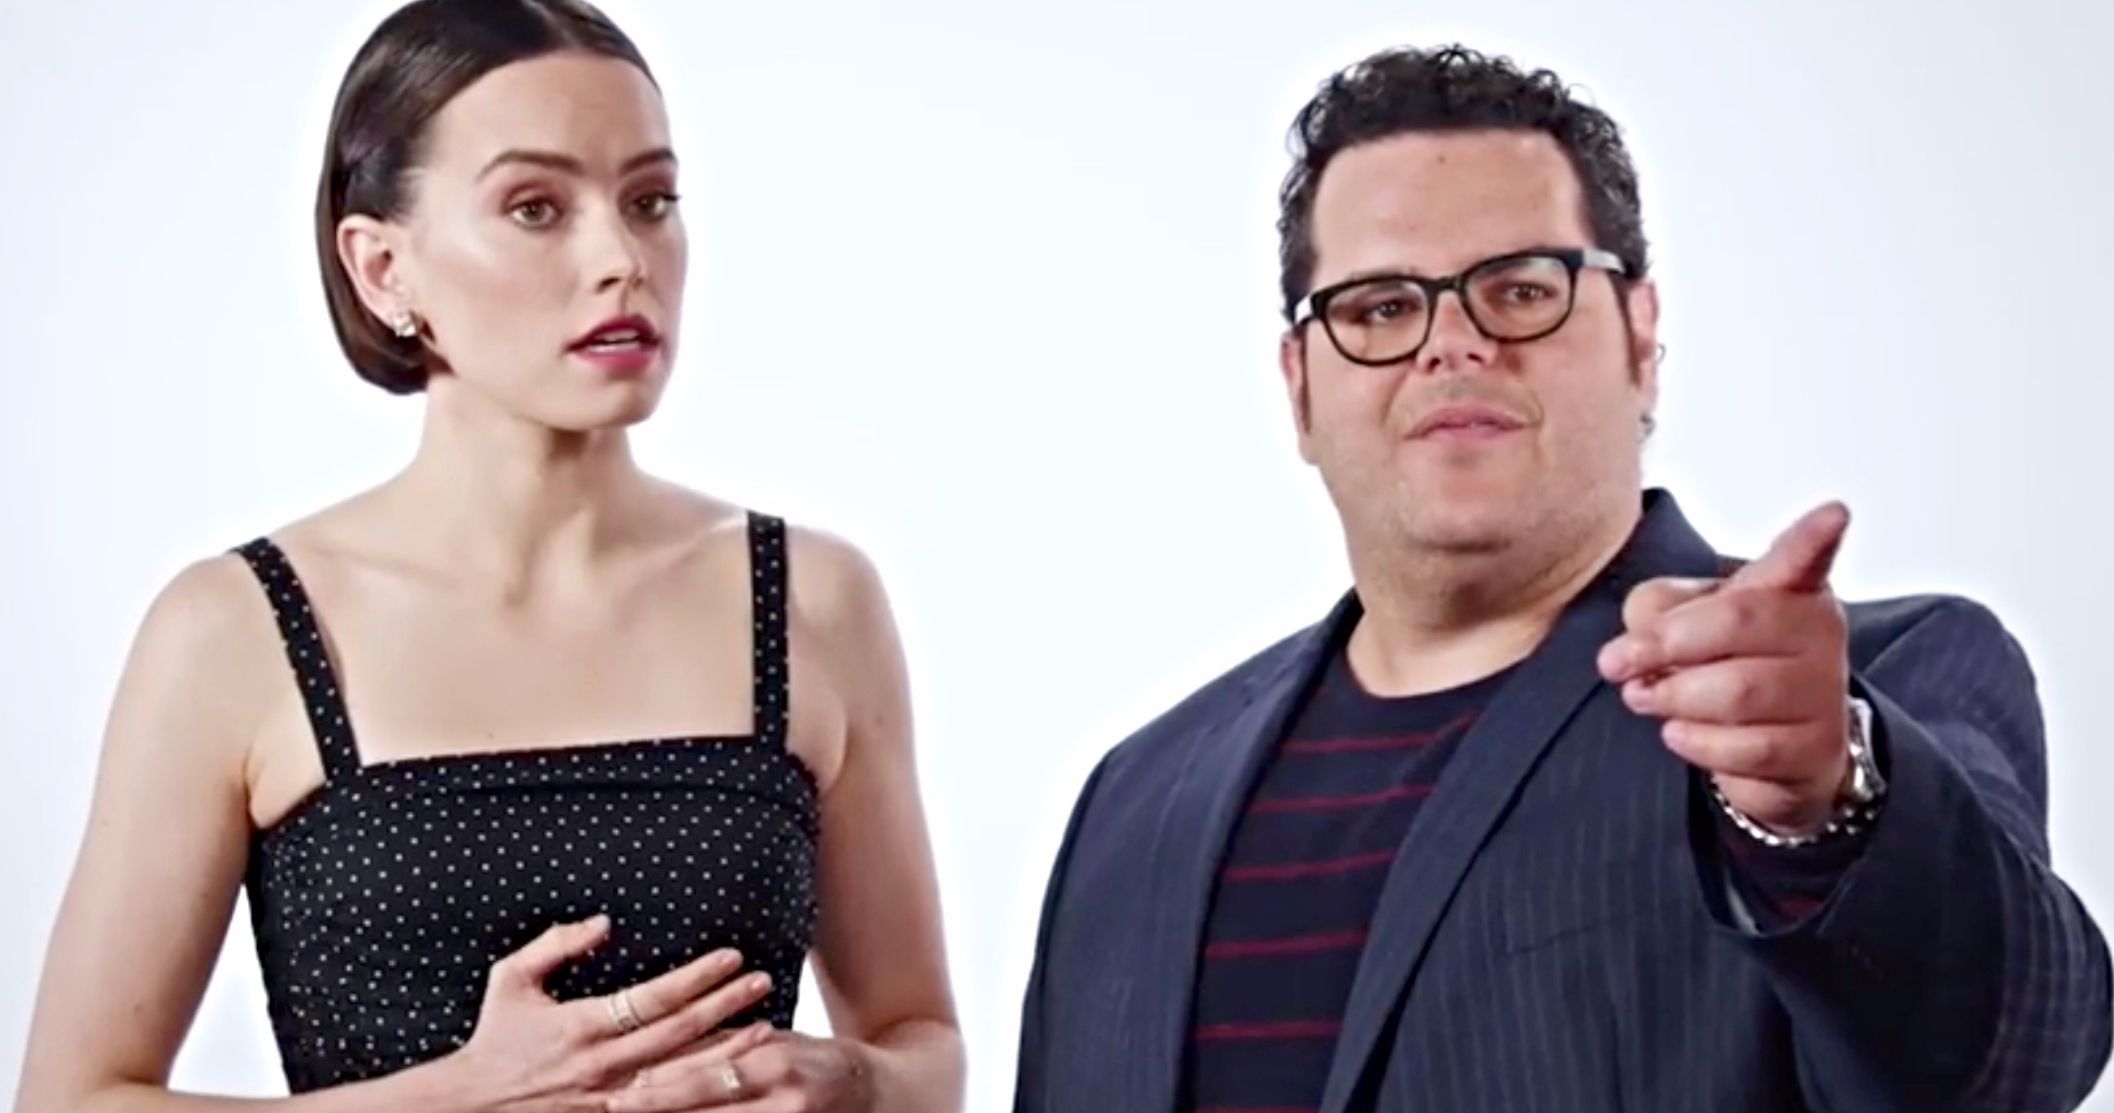 Star Wars 9 Spoilers: Watch Daisy Ridley Get Hounded by Josh Gad, Tom Holland and More